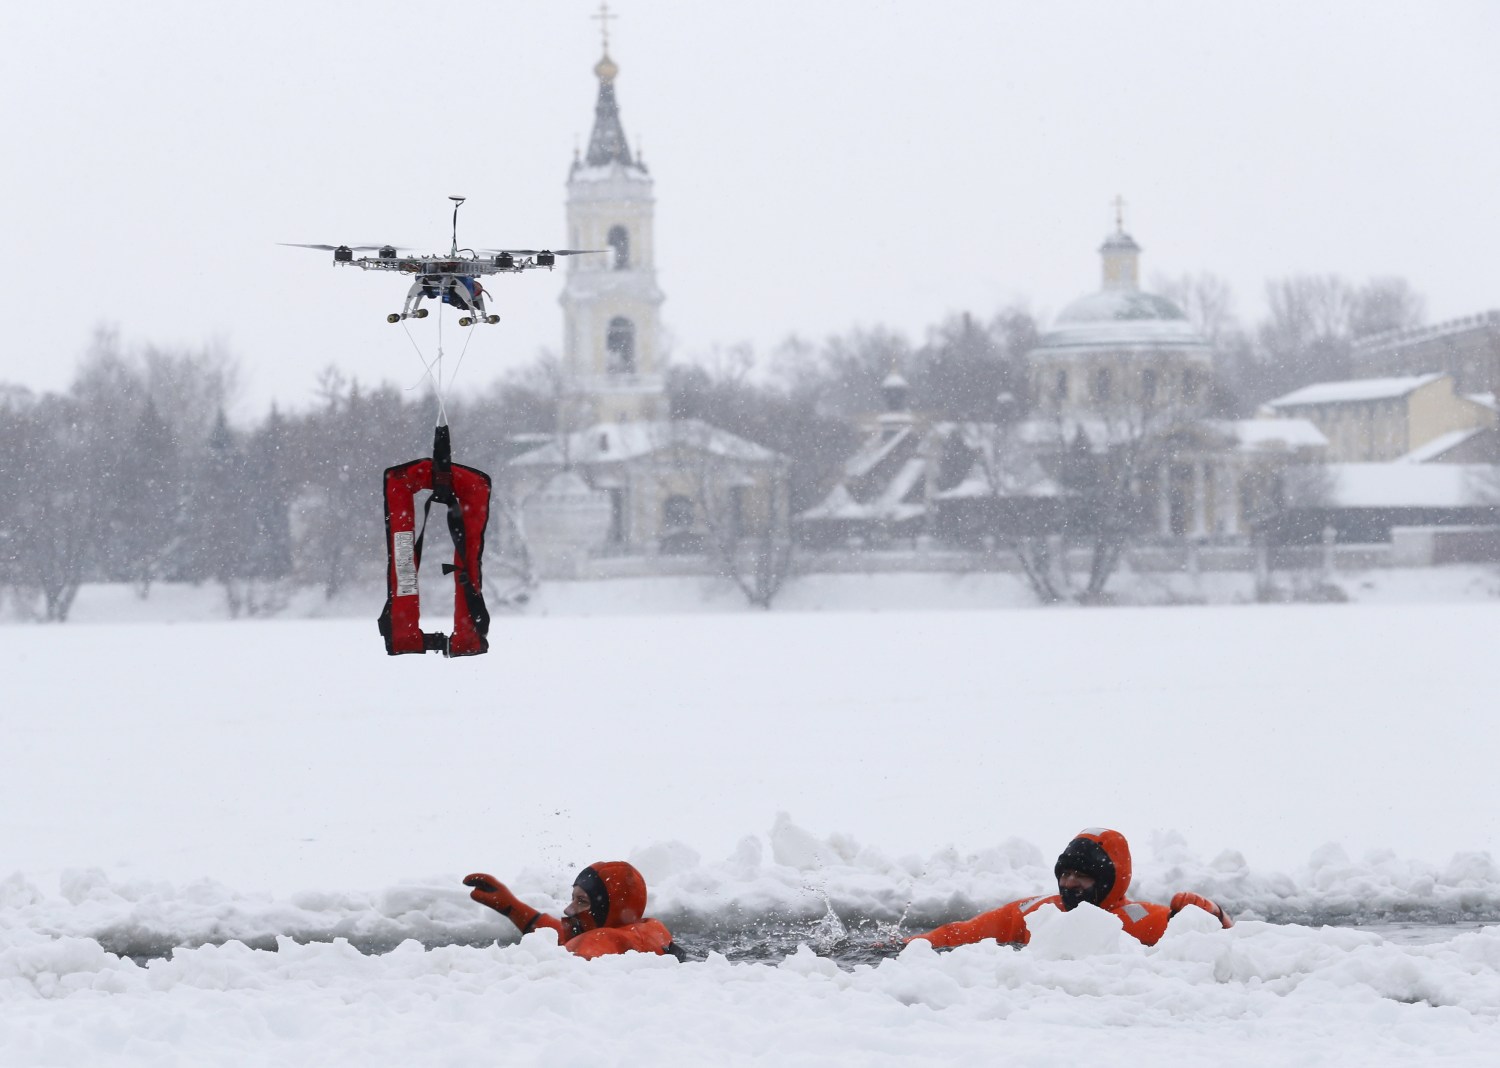 Members of the Russian Emergencies Ministry take part in a training session, part of the preparation for Russian Orthodox Epiphany celebrations, on the suburbs of Moscow, January 13, 2016. Orthodox believers will mark Epiphany on January 19 by immersing themselves in icy waters regardless of the weather. REUTERS/Maxim Zmeyev      TPX IMAGES OF THE DAY      - GF20000093324